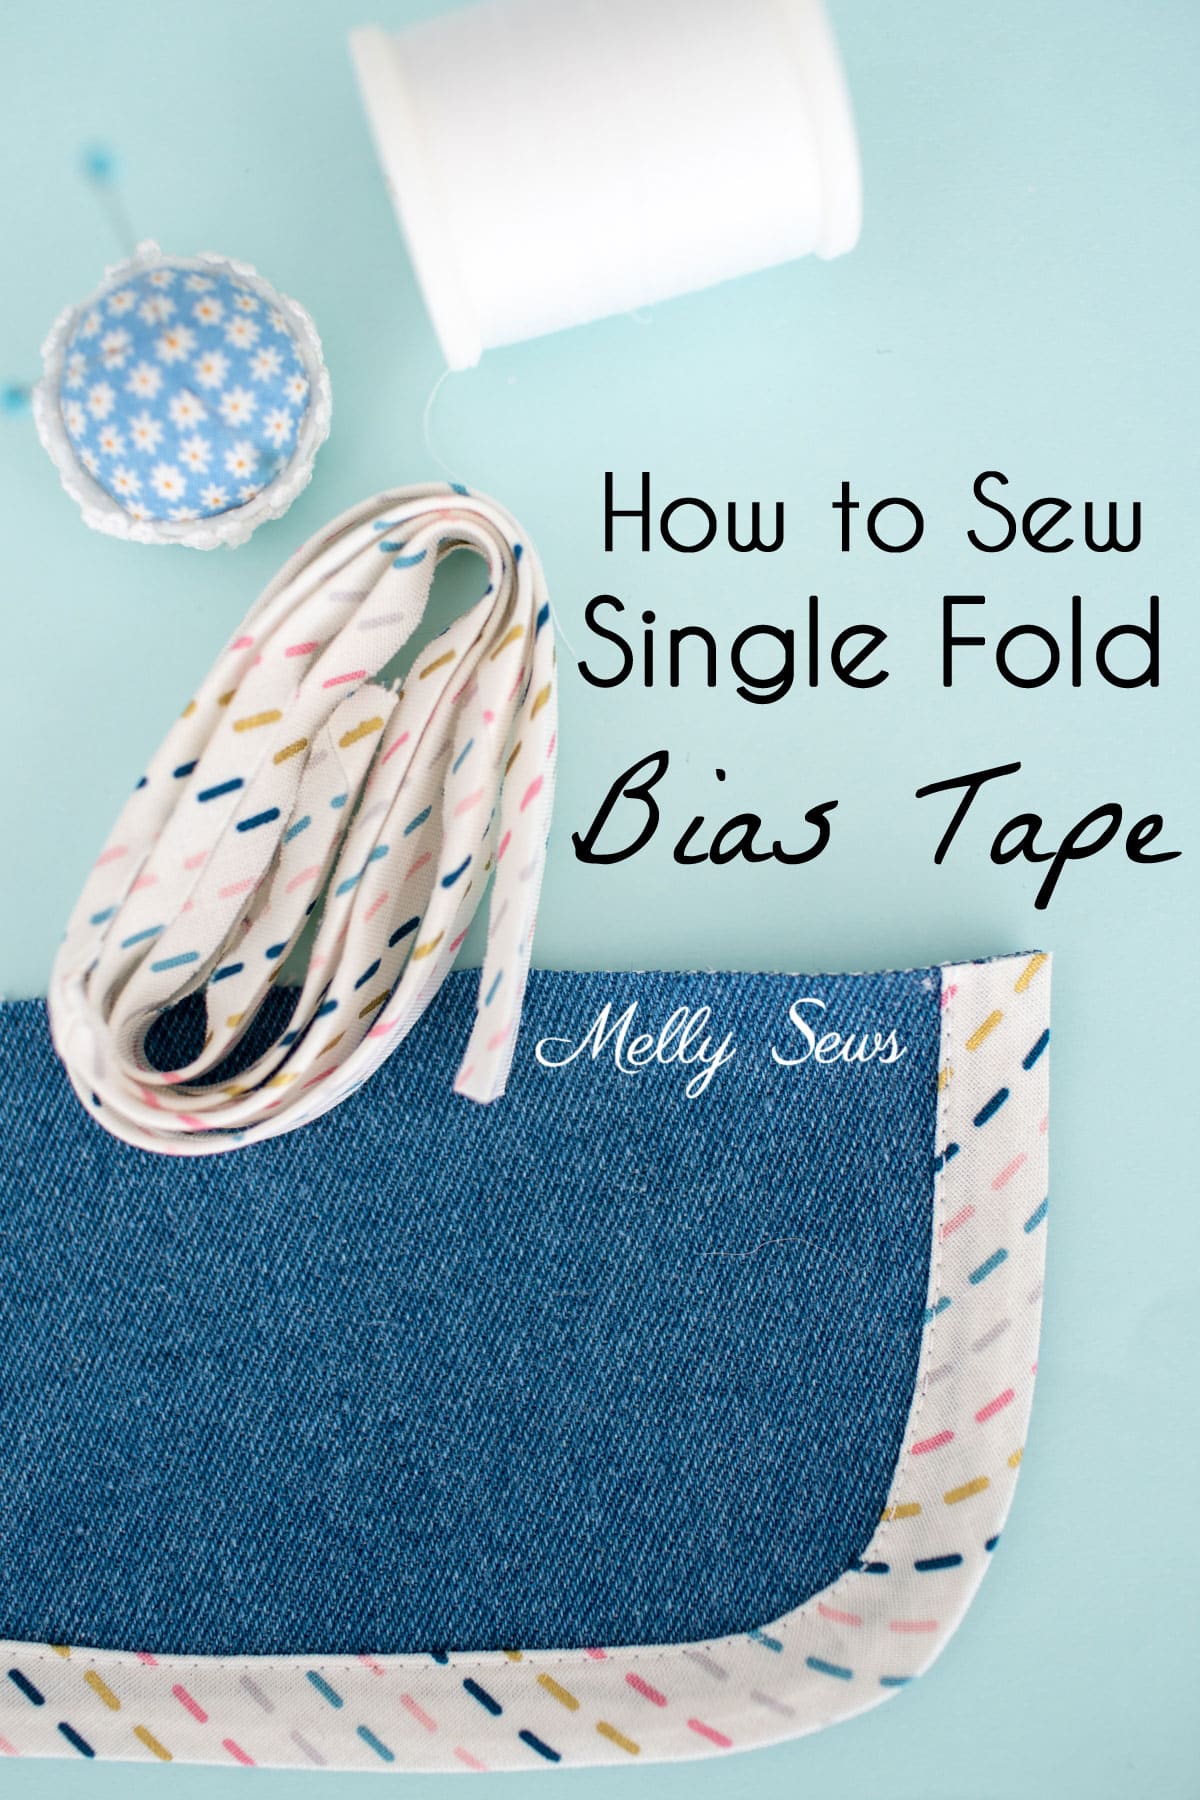 How to Use Single Fold Bias Tape - Melly Sews